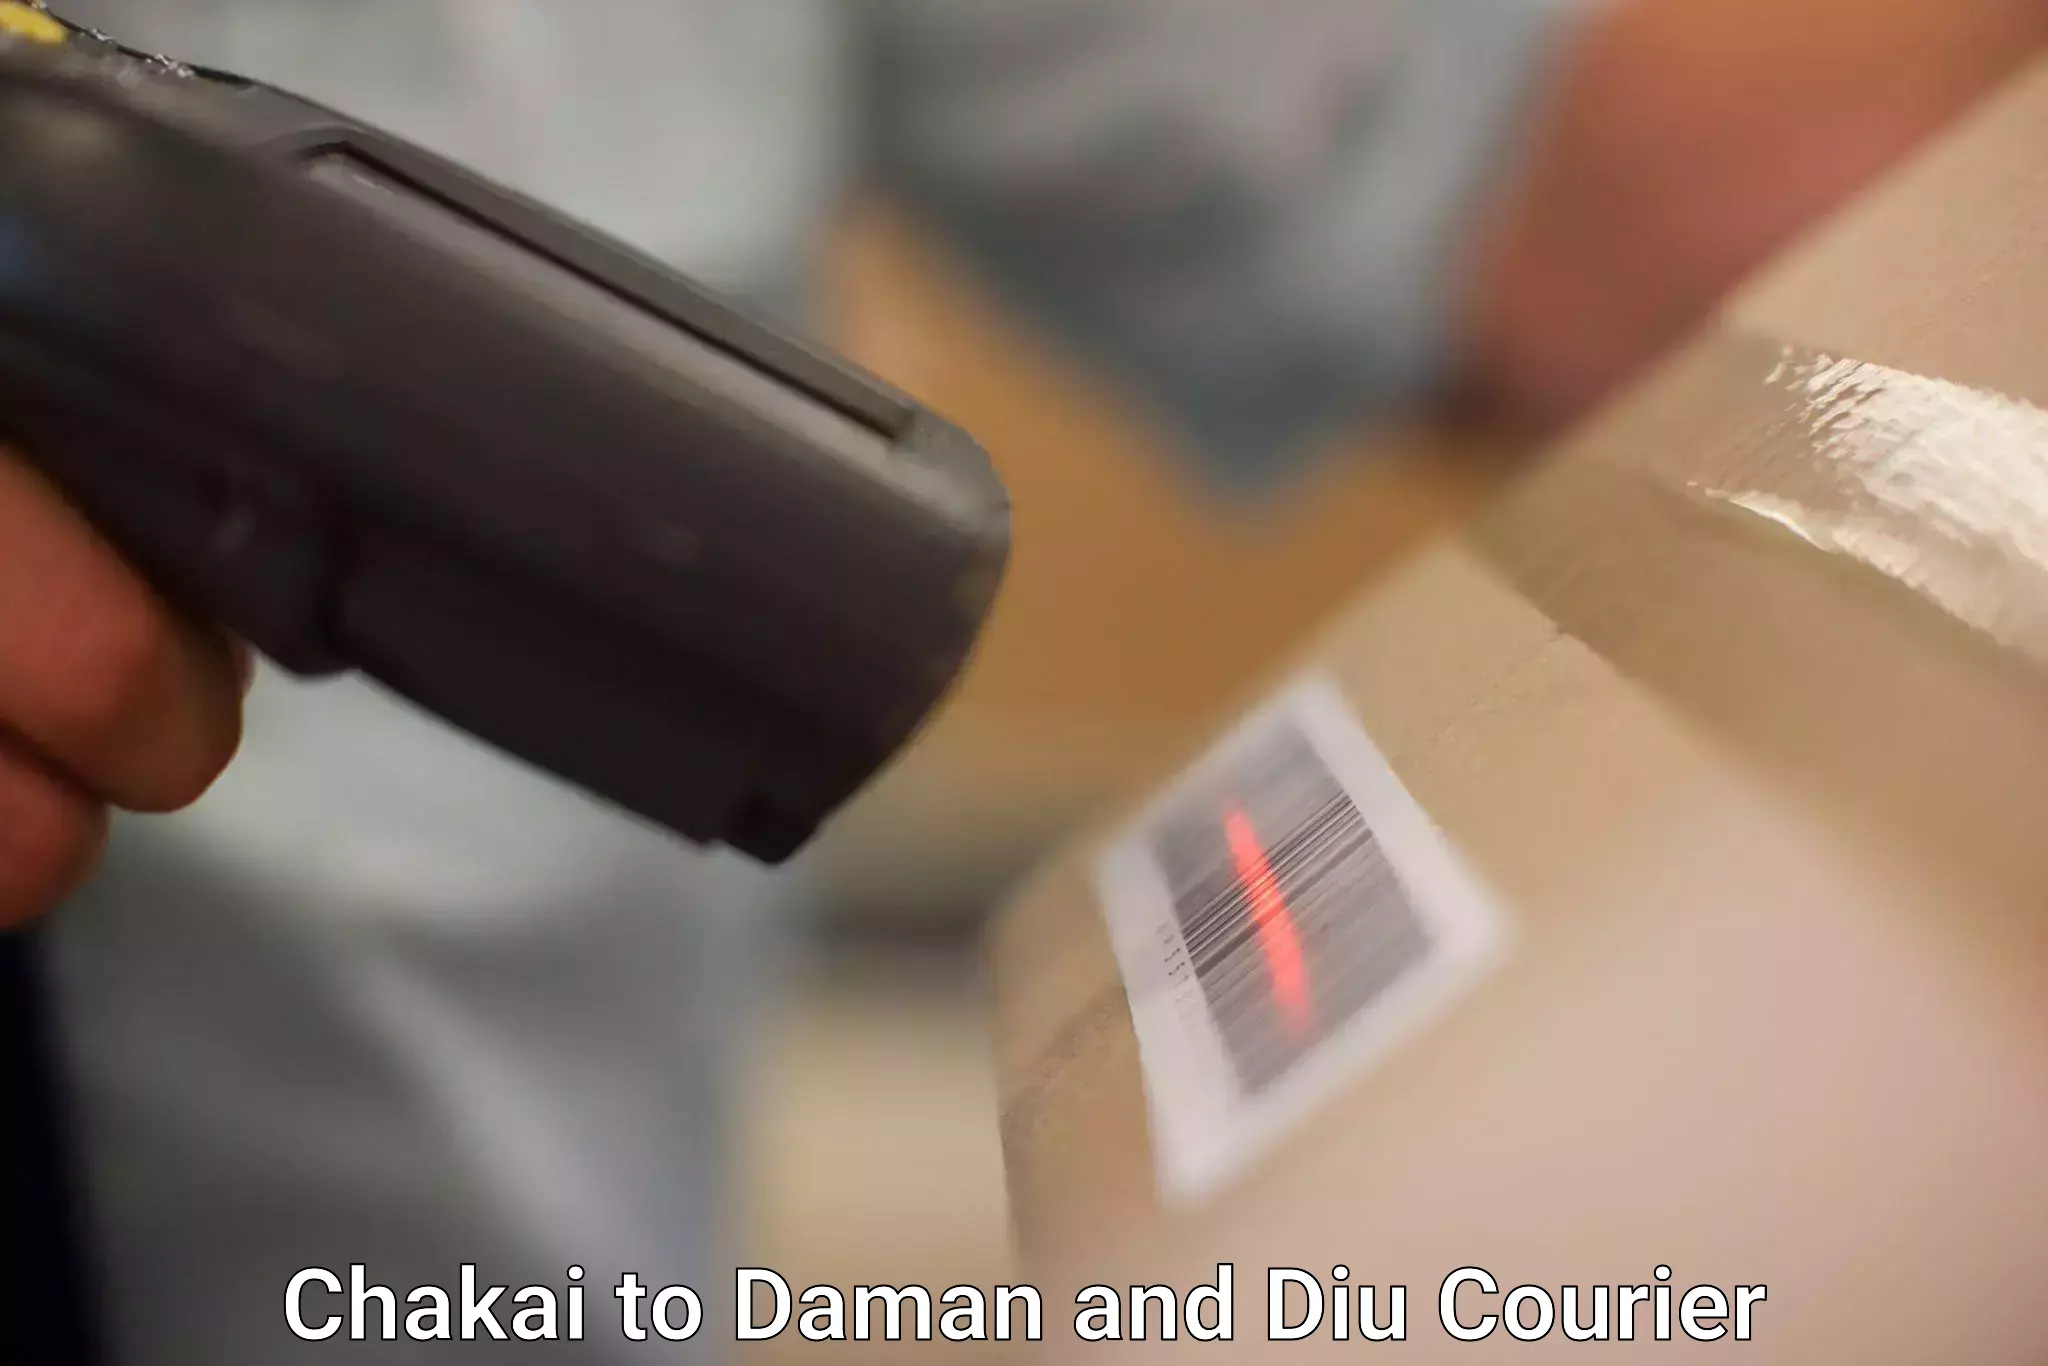 Express delivery capabilities Chakai to Daman and Diu